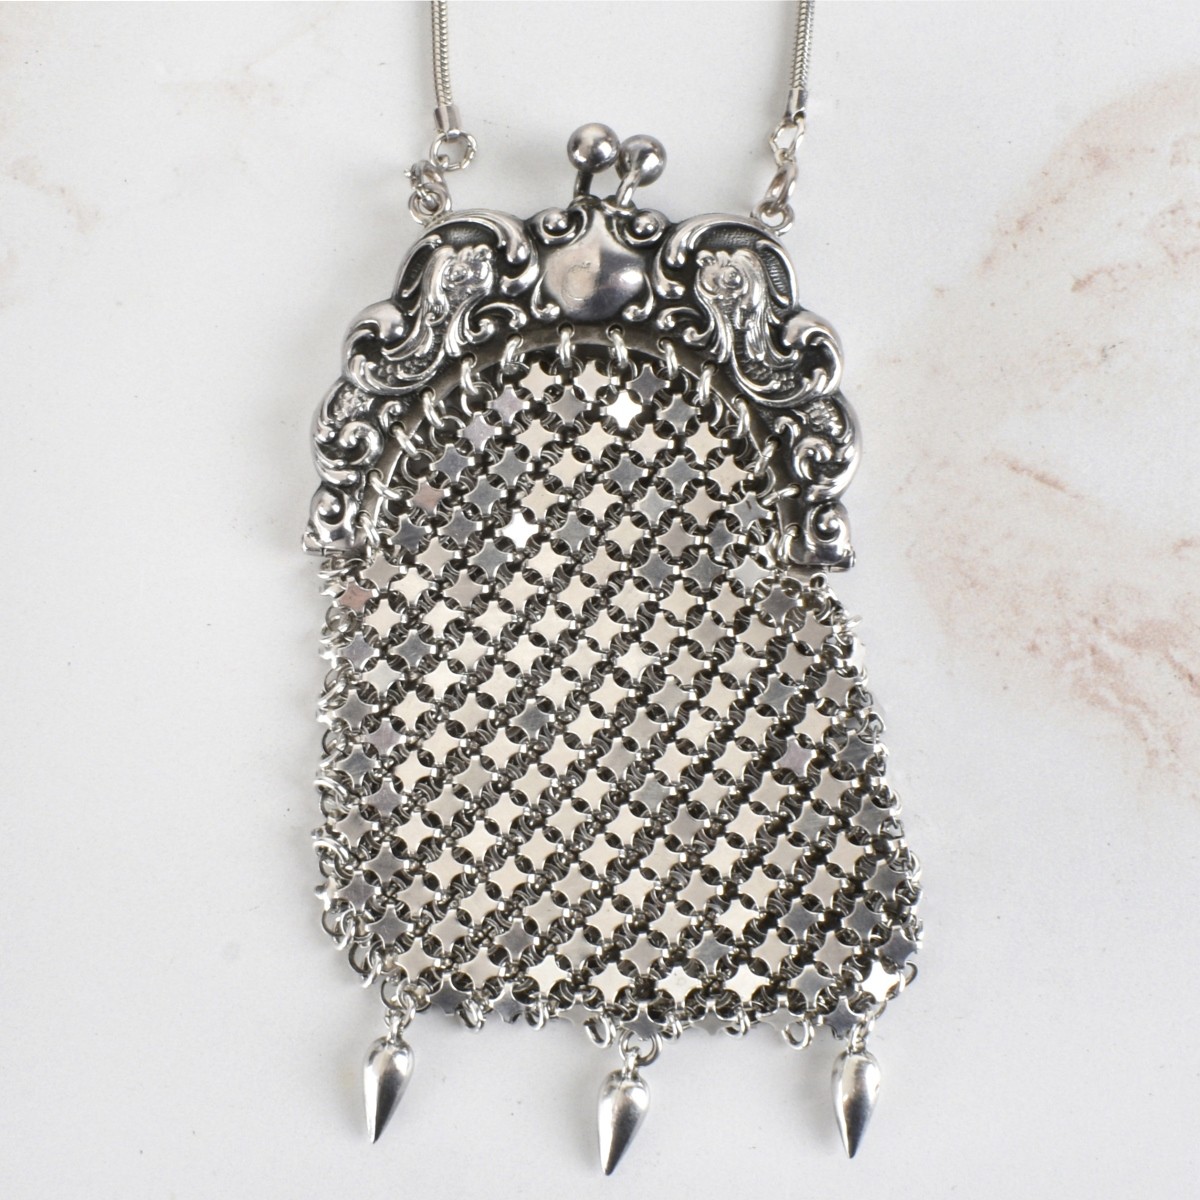 Silver Necklace and Purse